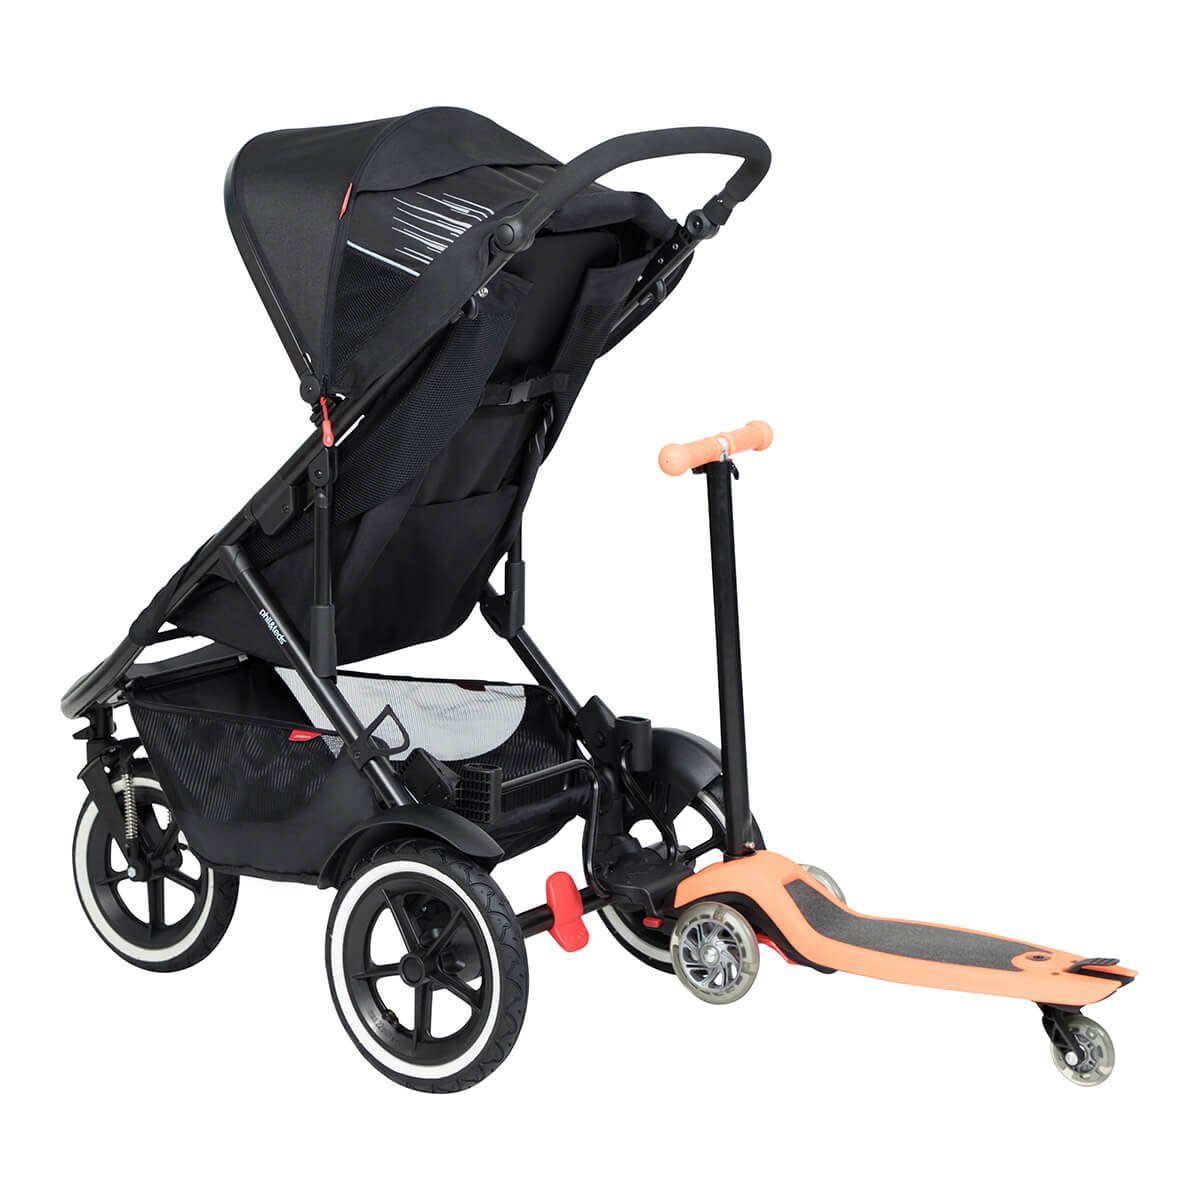 https://cdn.accentuate.io/7323497496664/19272668348504/philteds-sport-buggy-with-freerider-stroller-board-in-rear-v1667535544399.jpg?1200x1200